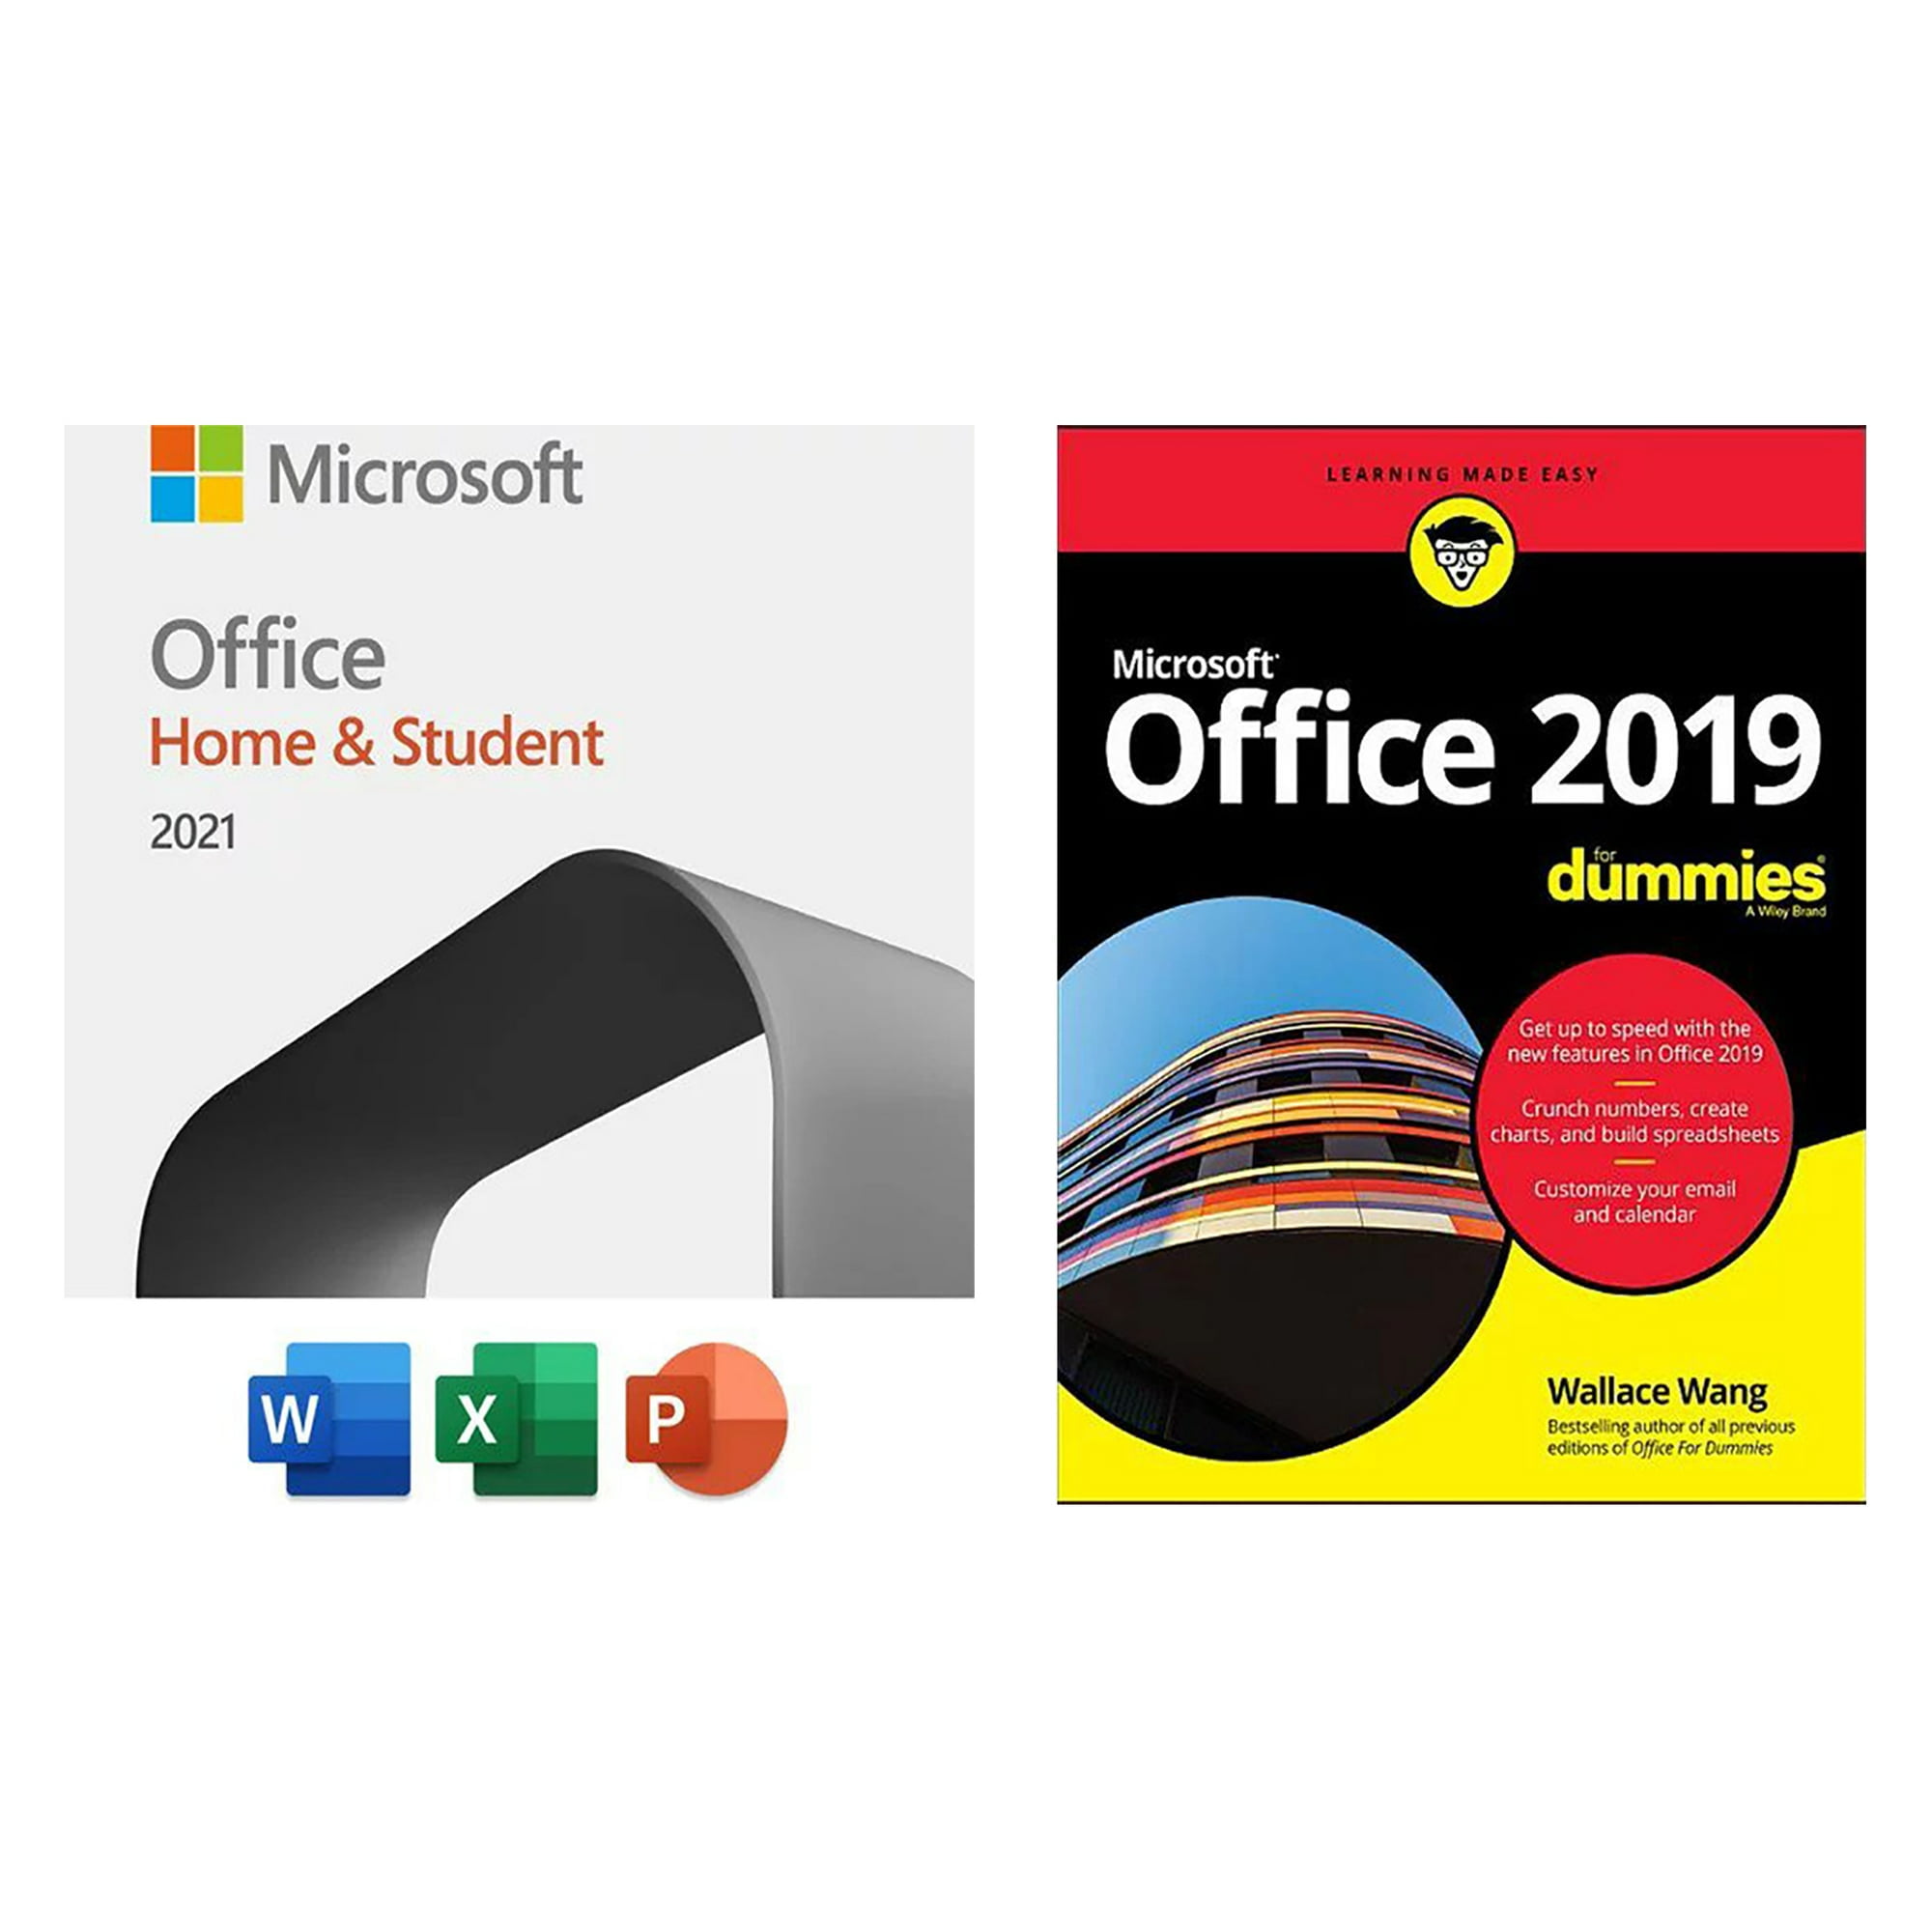 How to Download Microsoft Office 2019 for Free